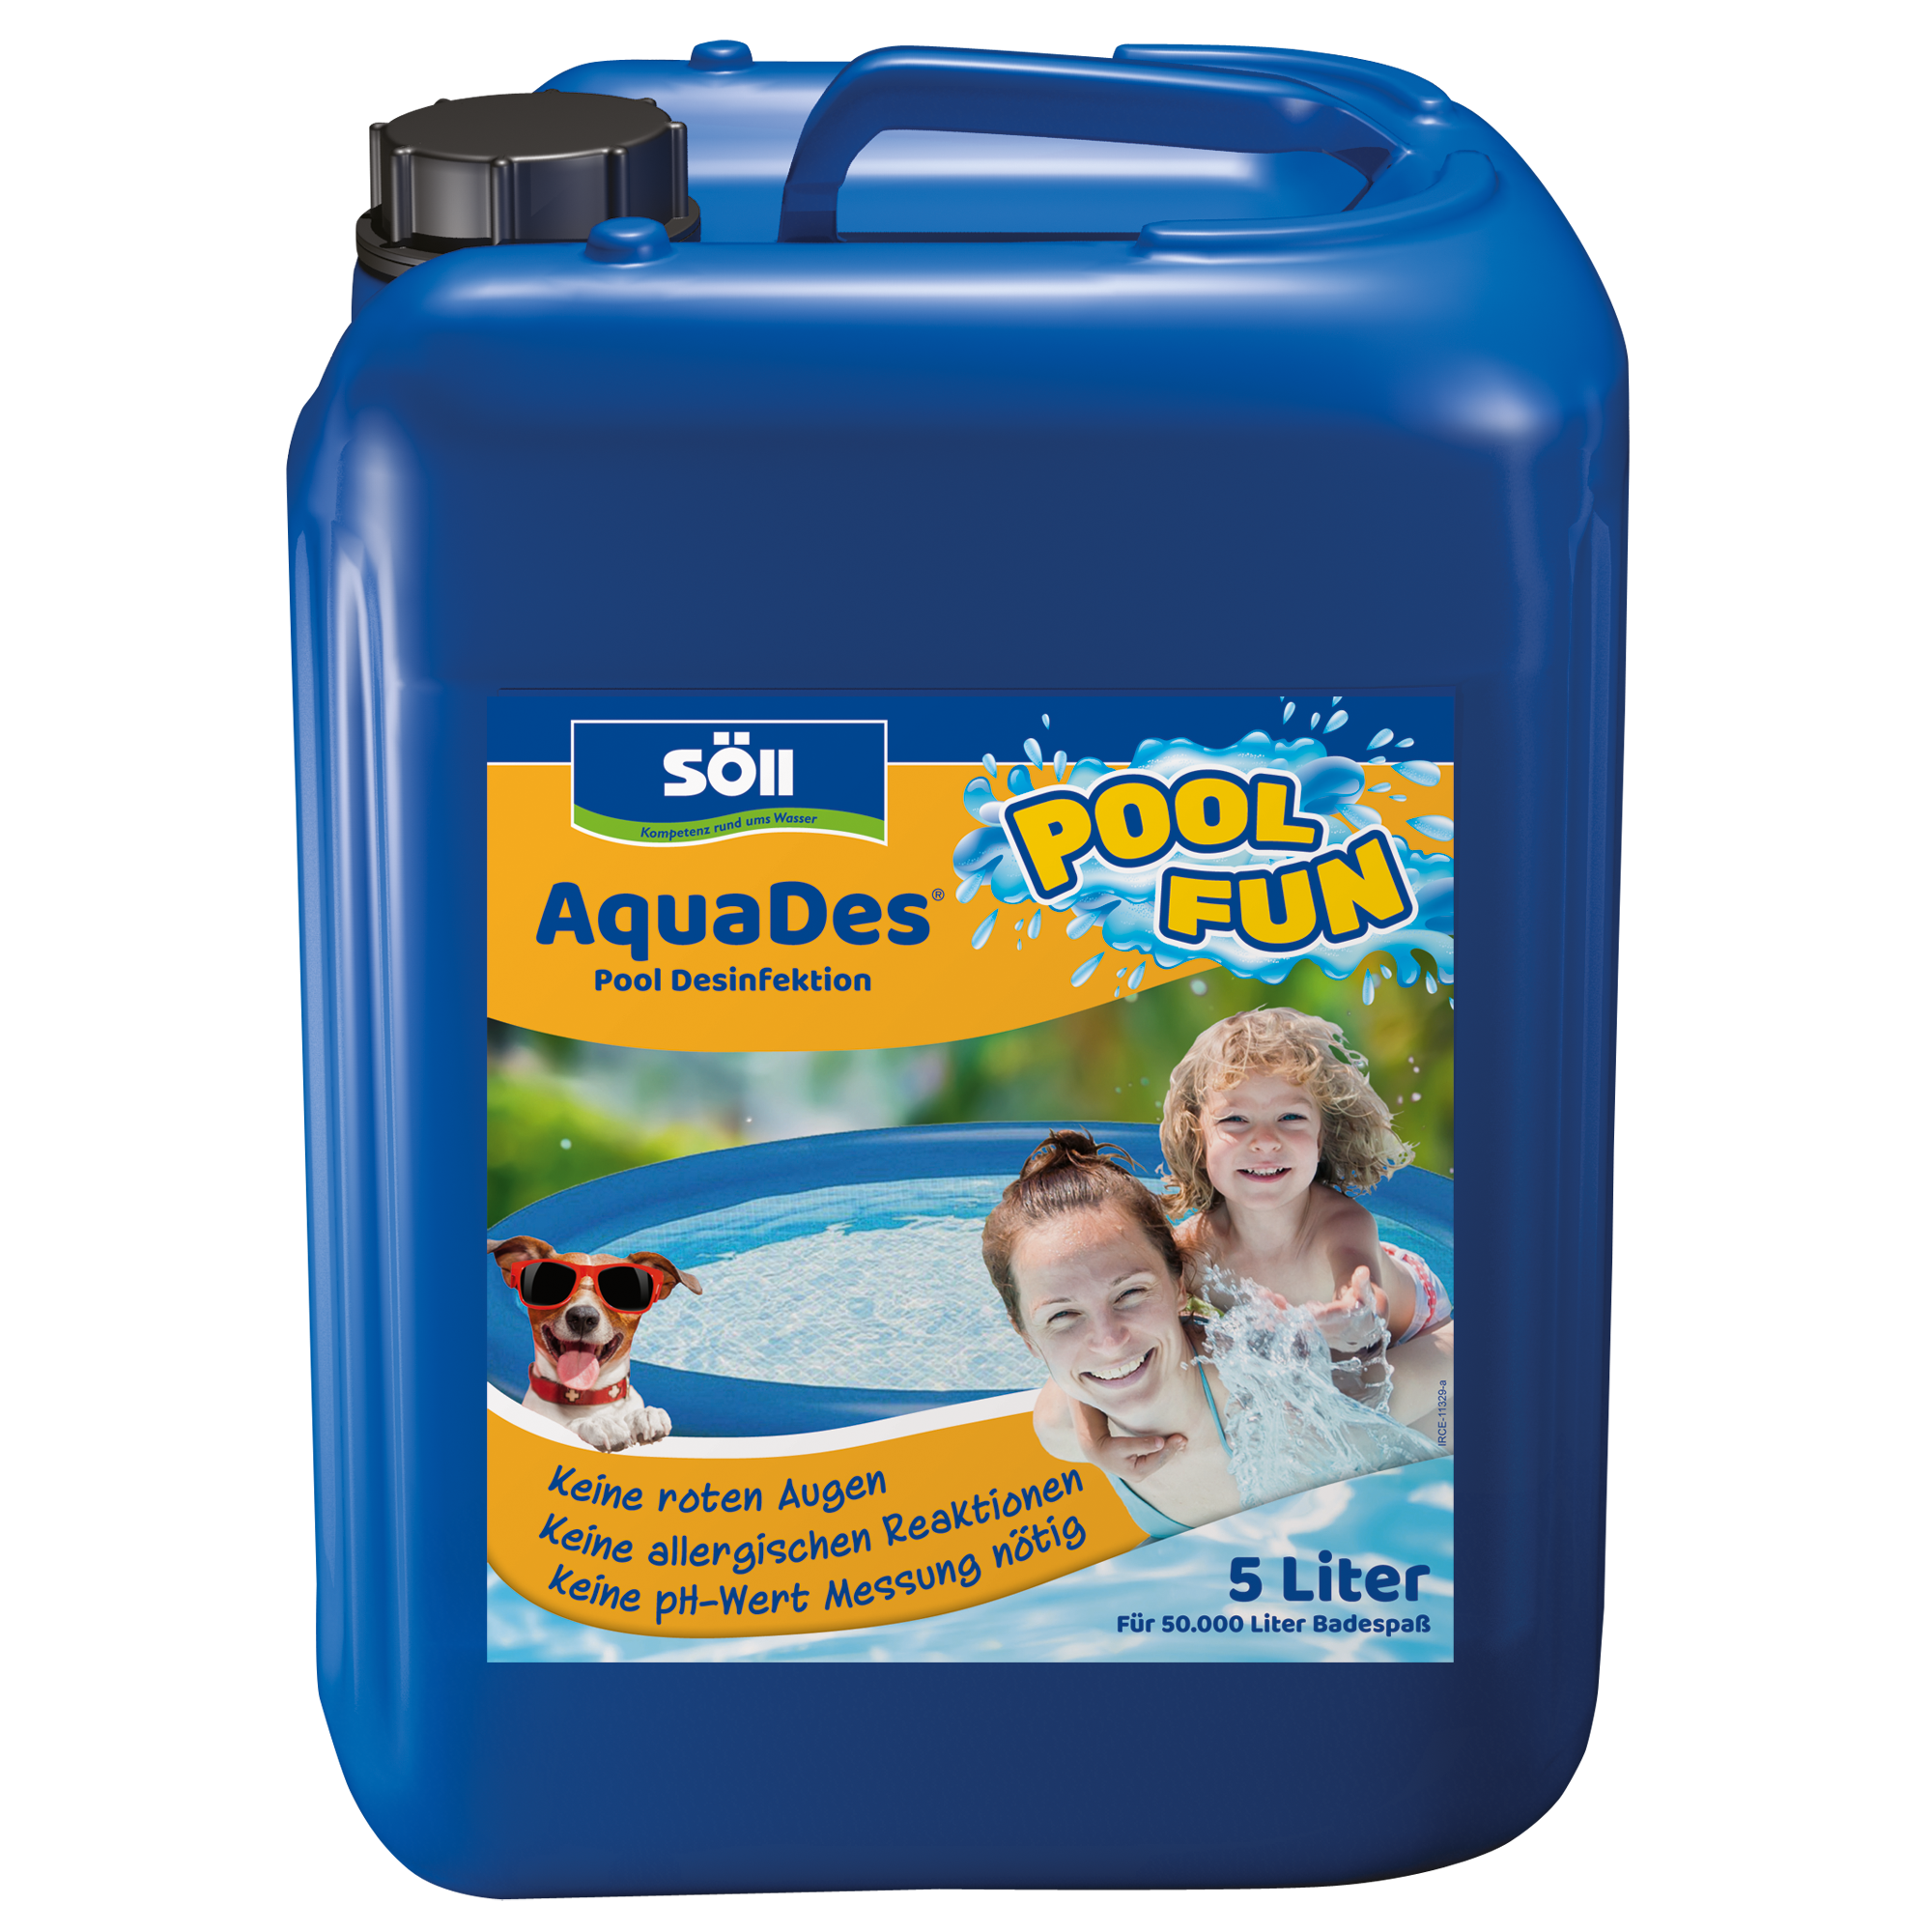 Pool-Desinfektion 'AquaDes' 5 Liter + product picture